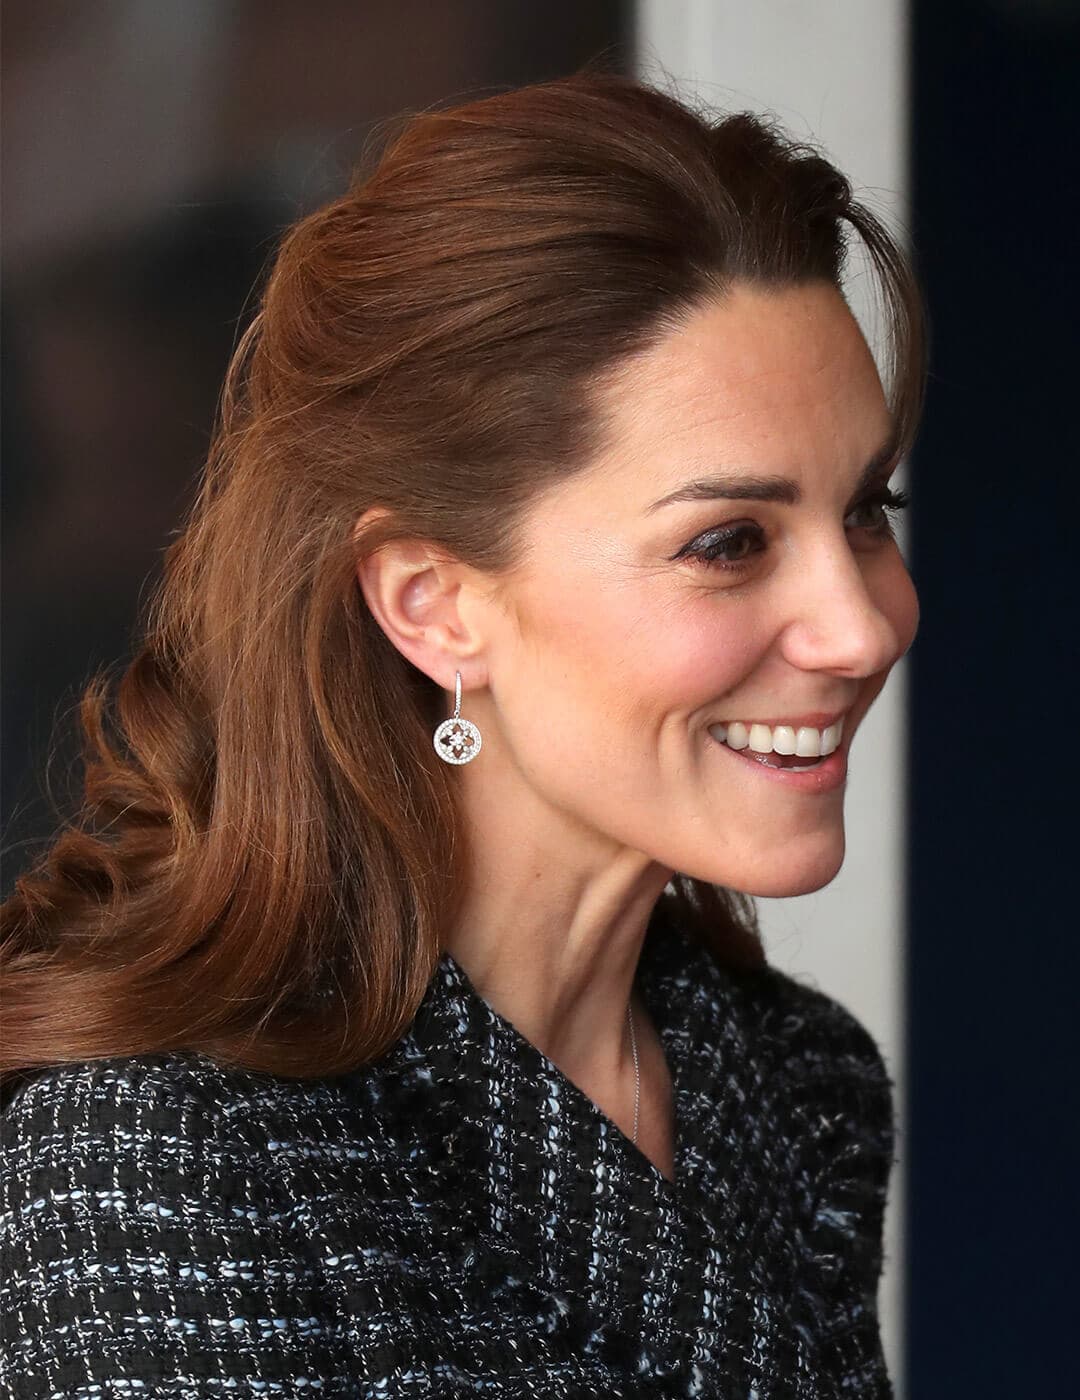 A photo of Kate Middleton with a half-up hairstyle